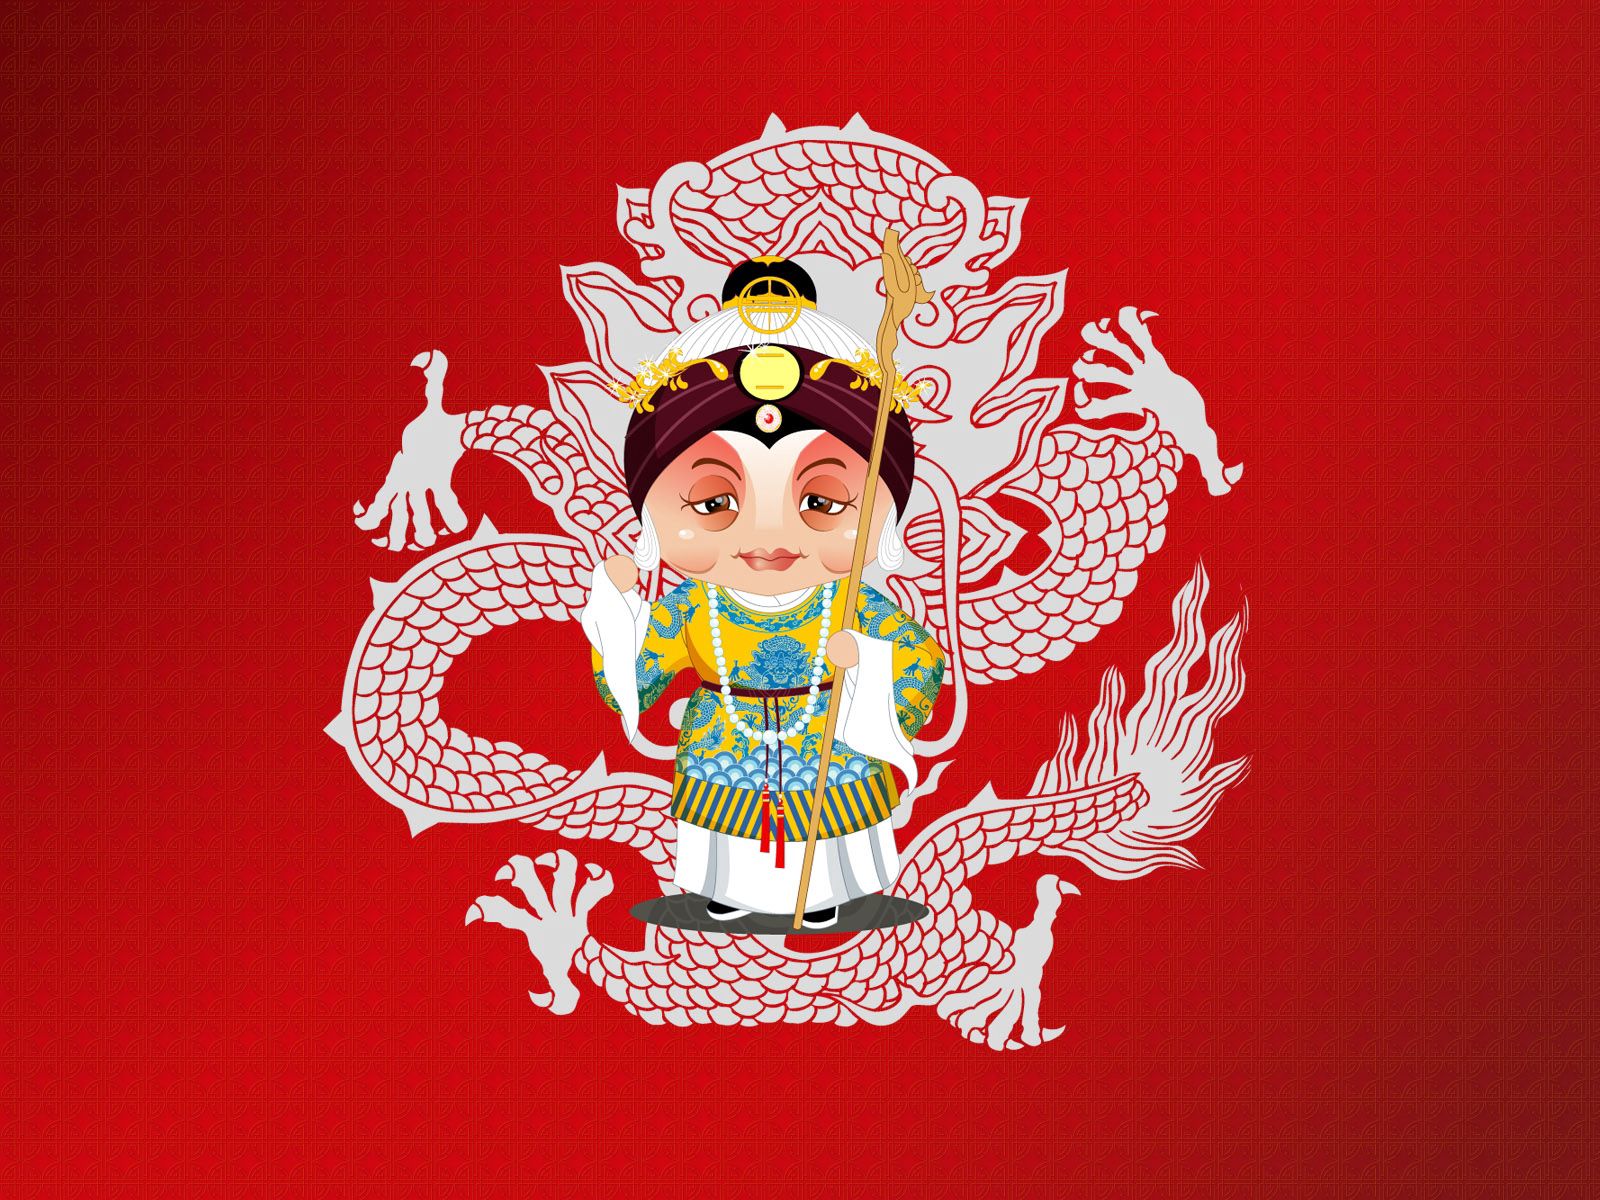 137112 Screensavers and Wallpapers Man for phone. Download patterns, vector, man, dragon, costume, peking opera, beijing opera pictures for free